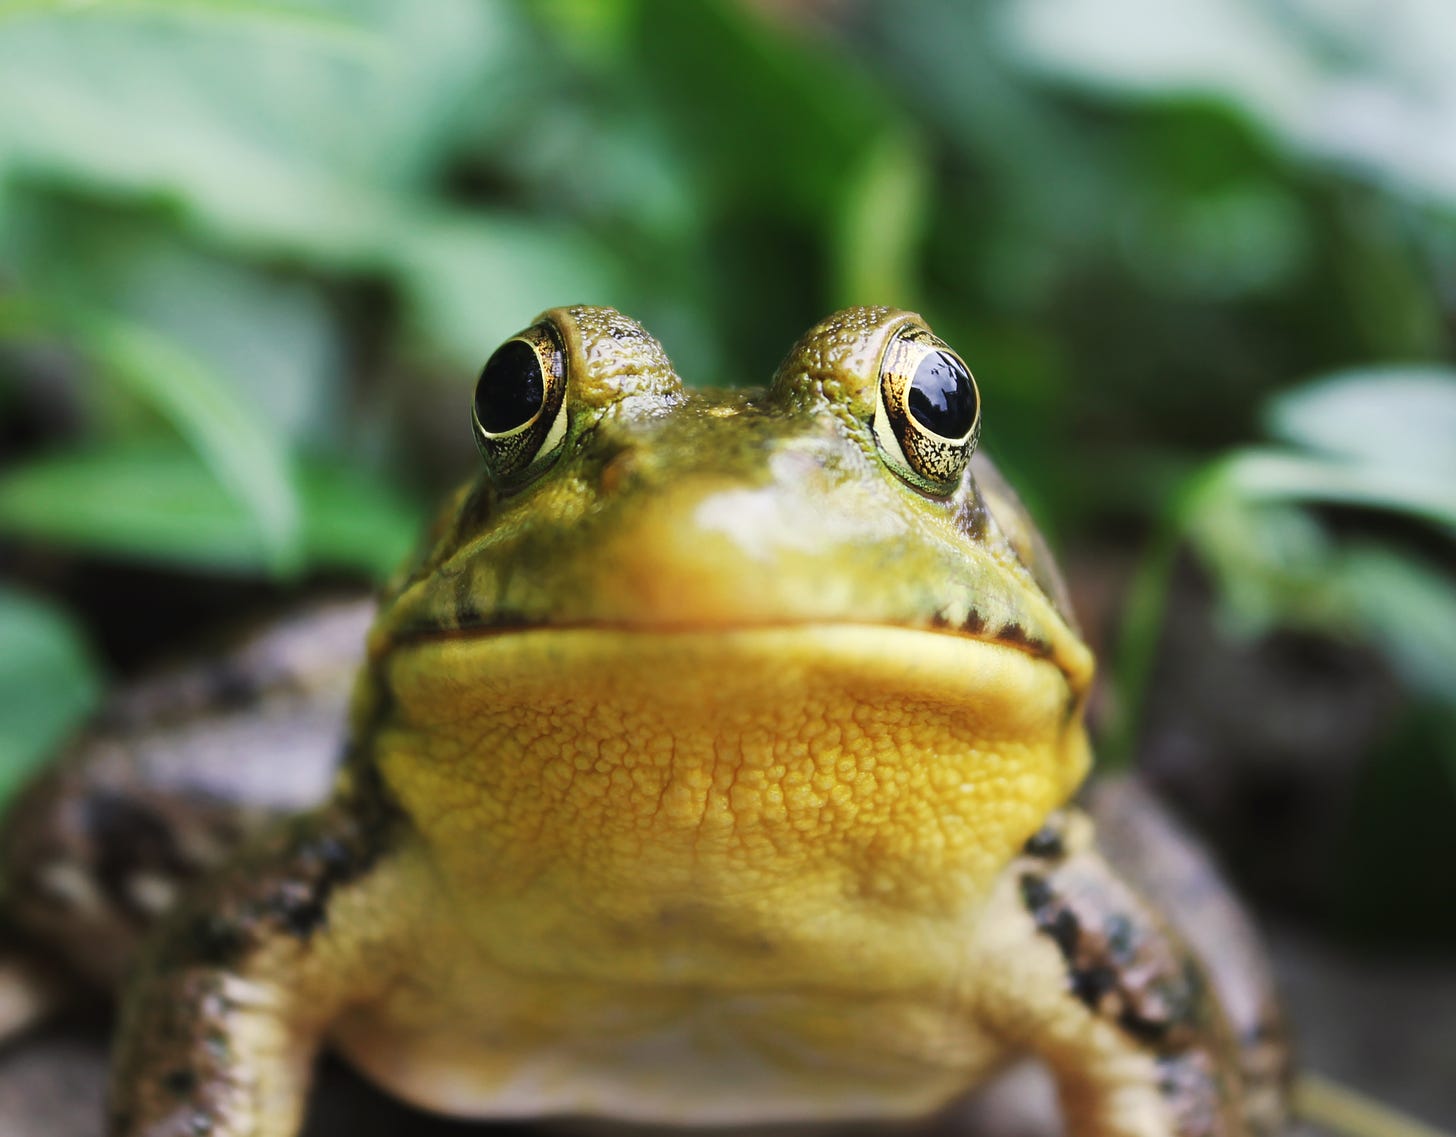 Close-up of a green and yellow frog's face with a chagrined expression